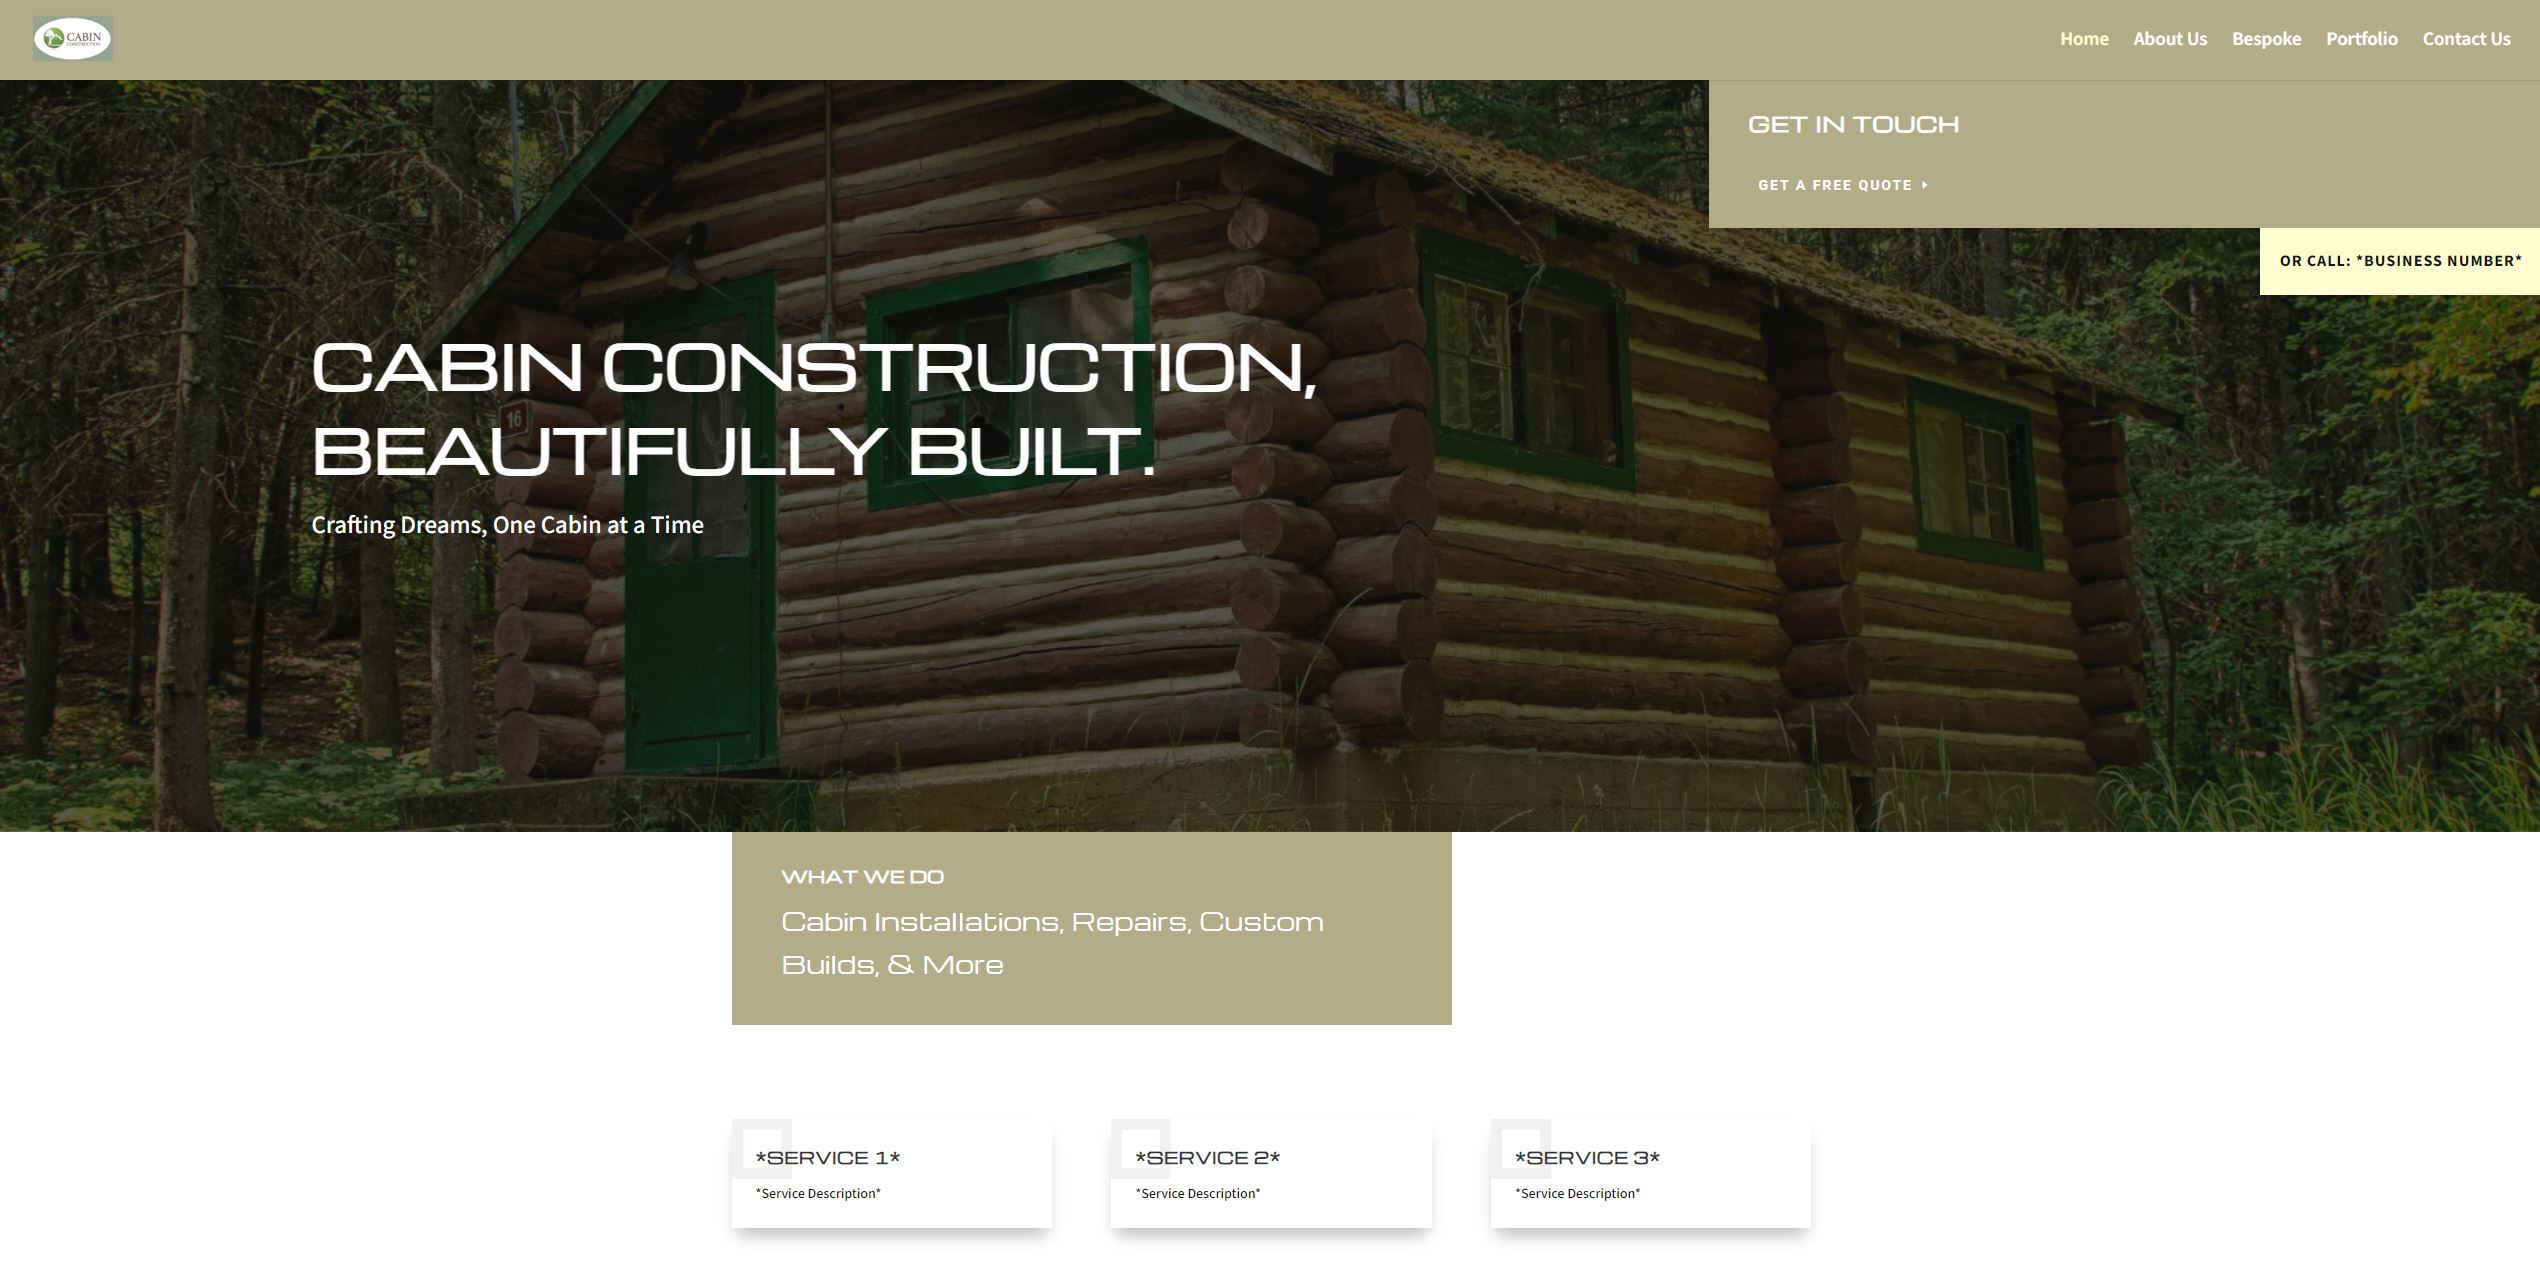 Cabin Construction Project